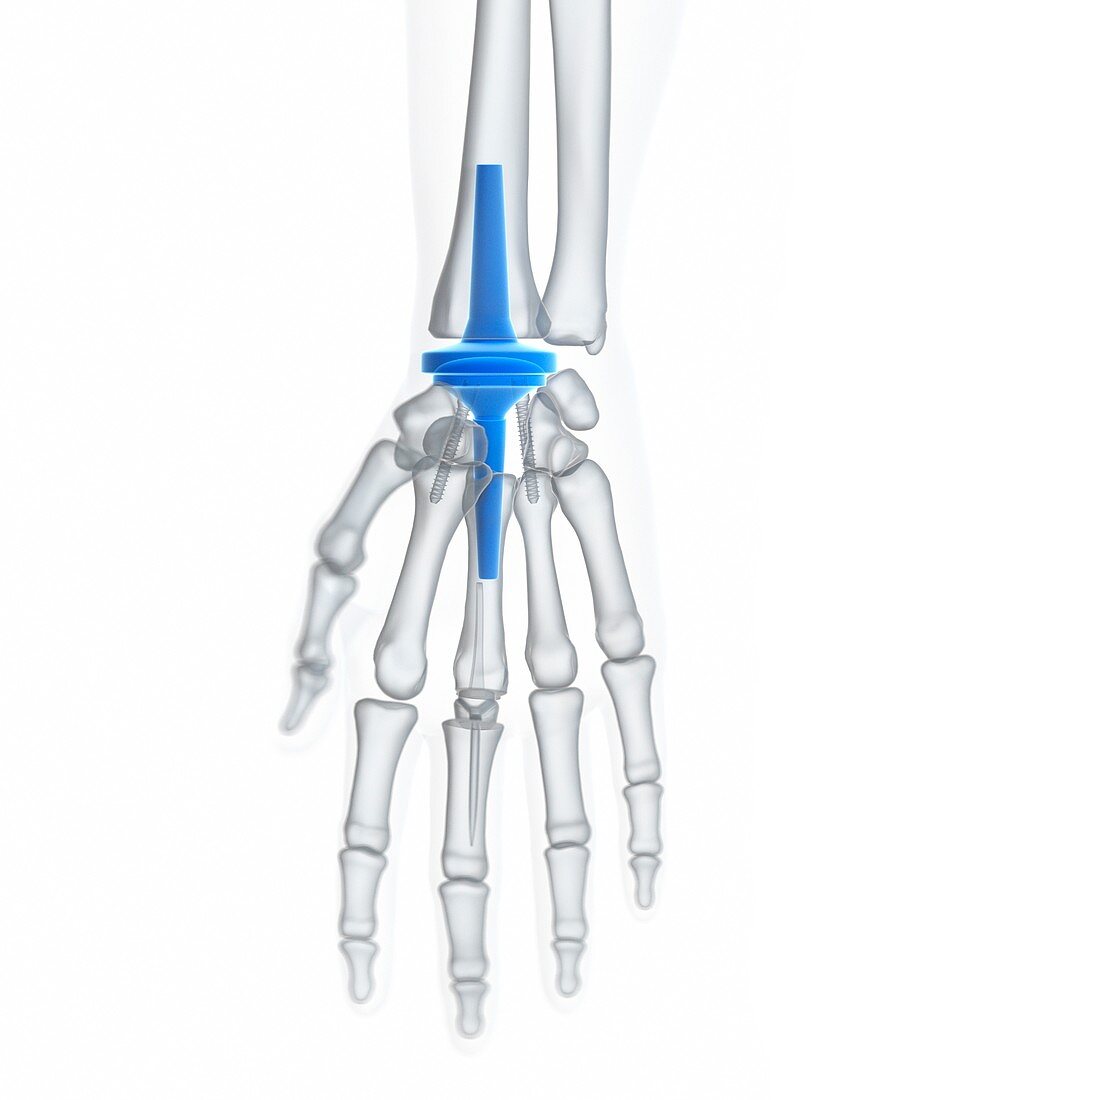 Illustration of a wrist replacement